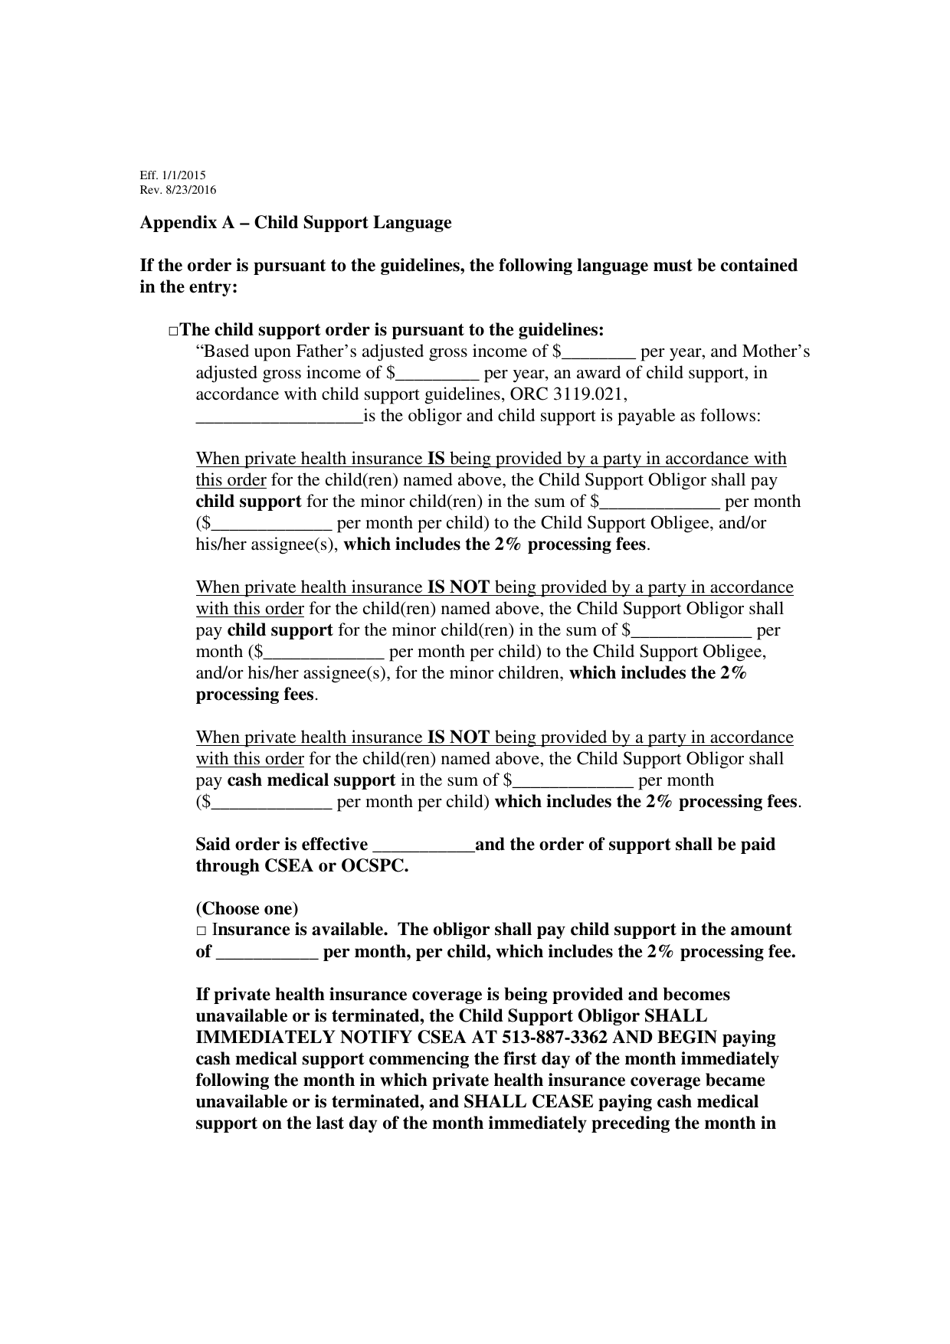 Appendix A Child Support Language - Butler County, Ohio, Page 1